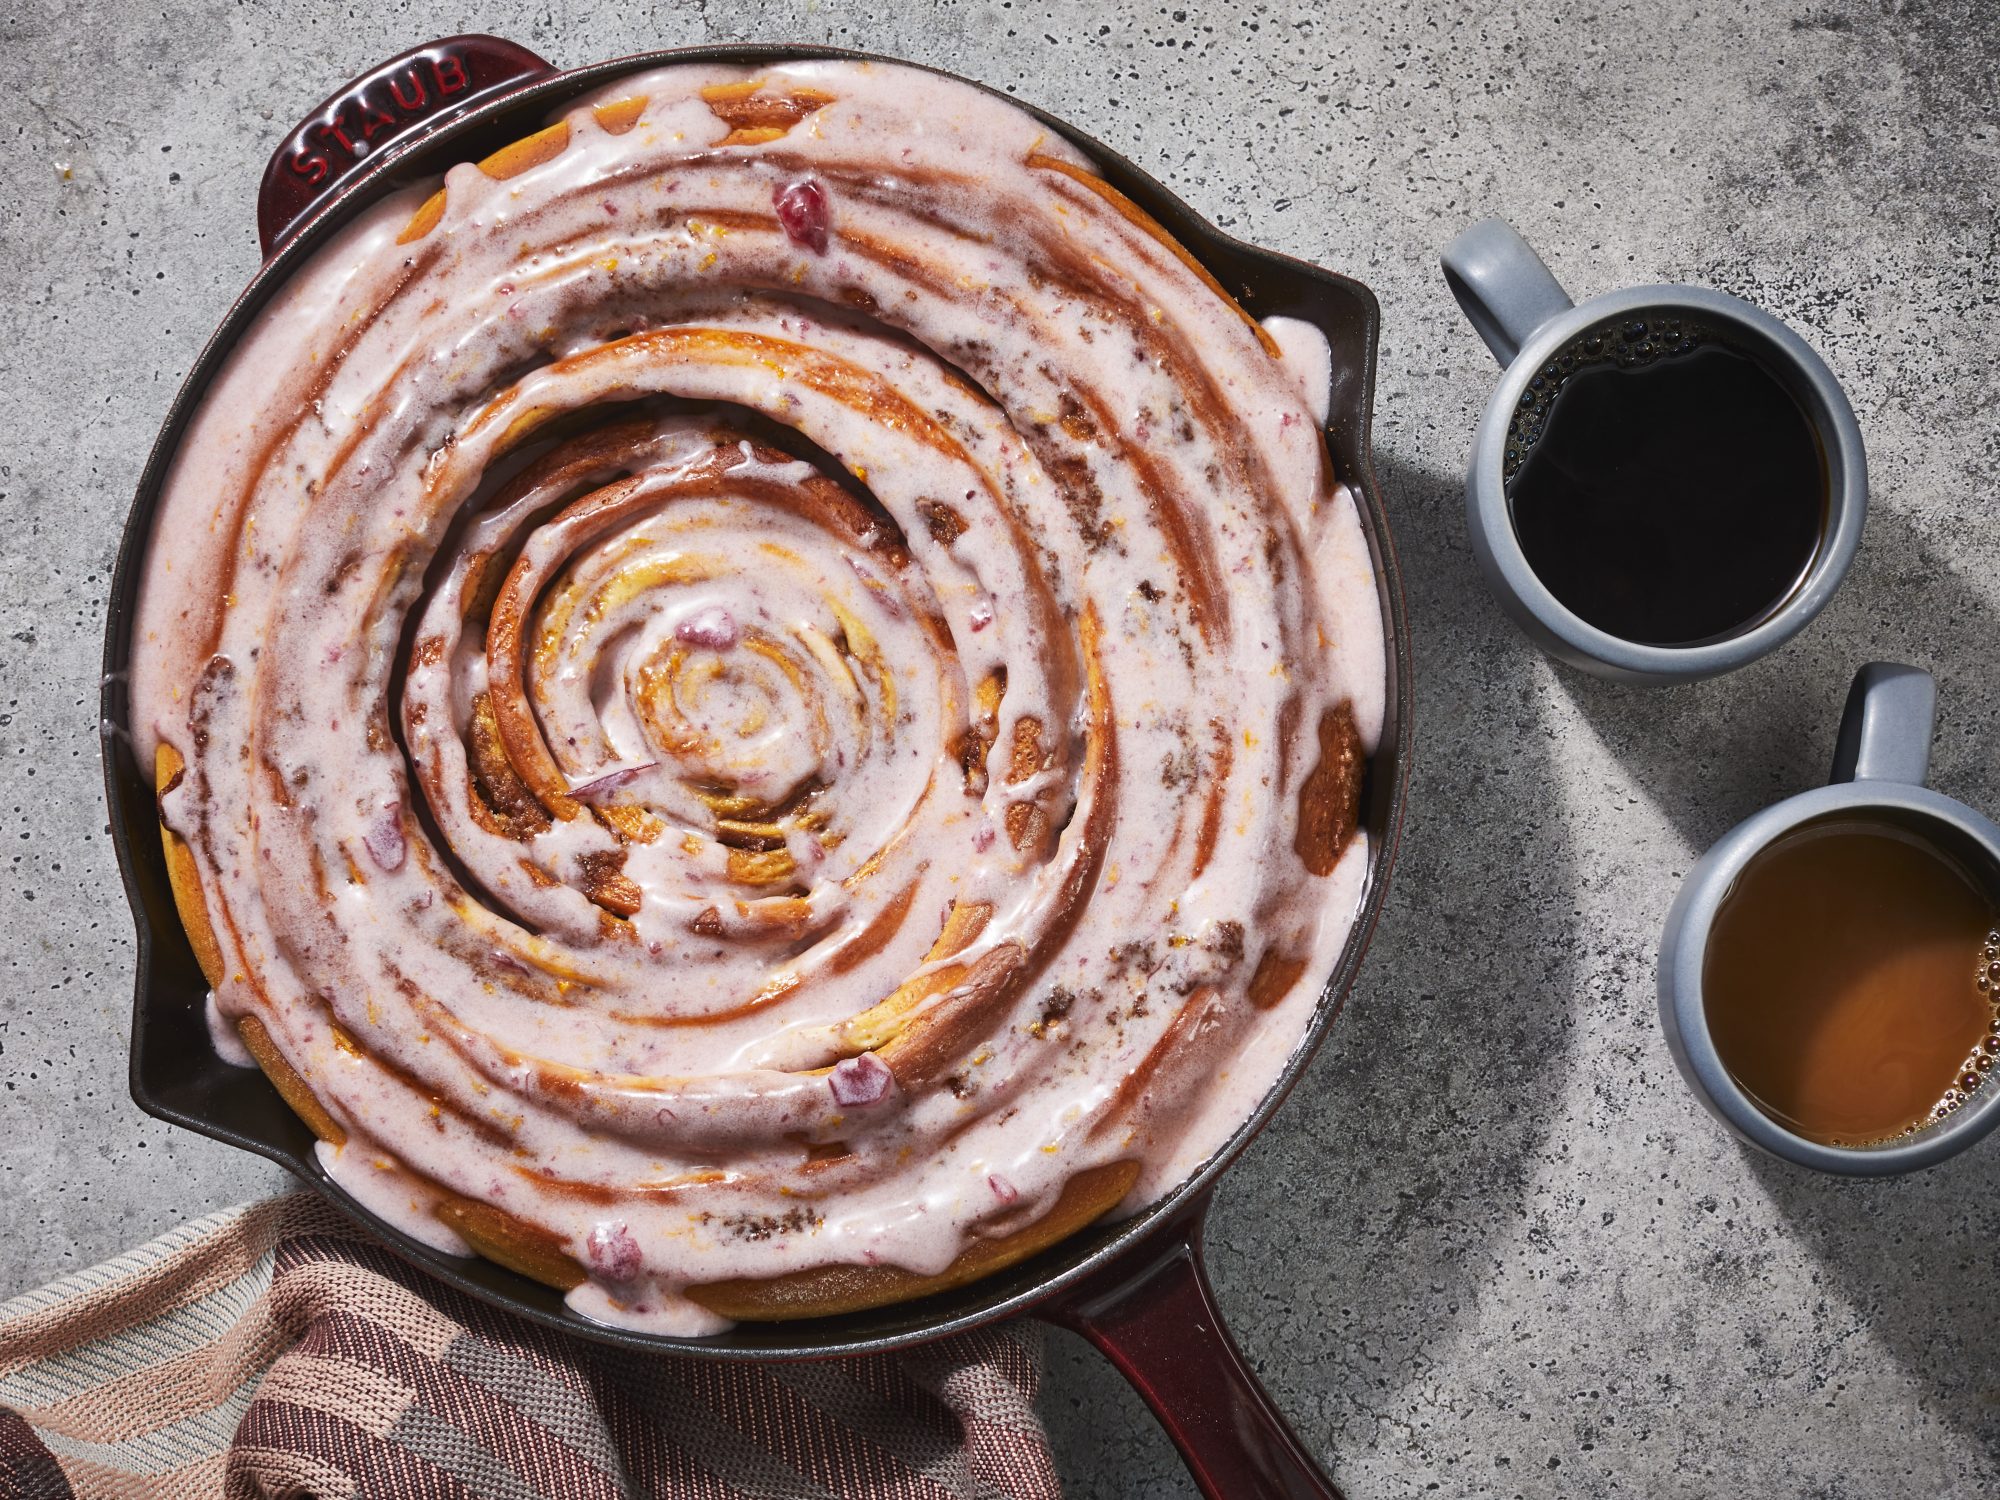 Skillet Cinnamon Roll With Cranberry Glaze 